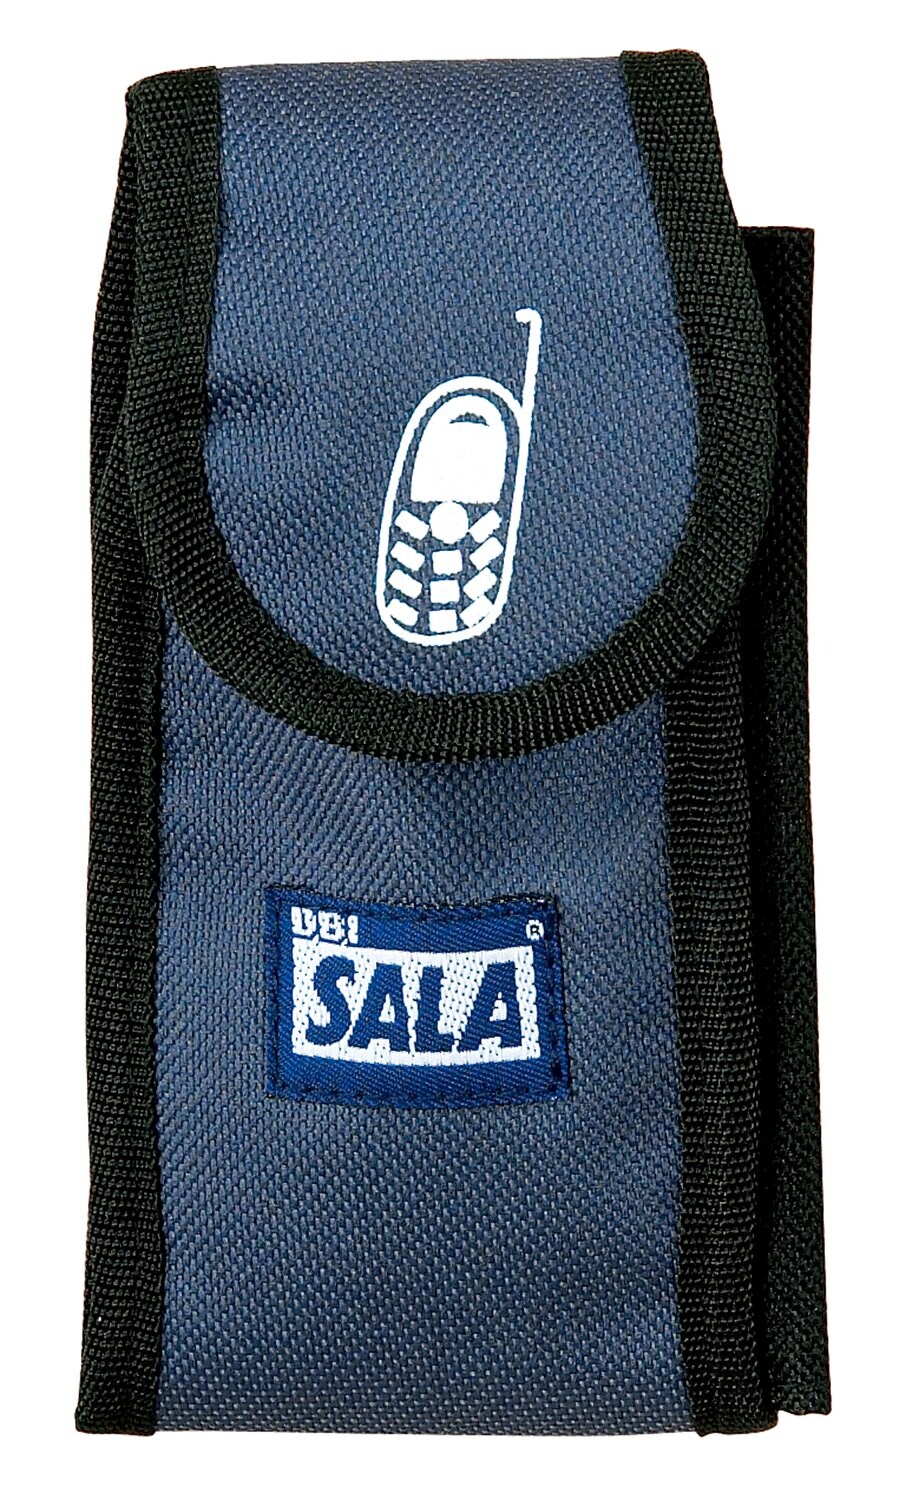 7012821177 - 3M DBI-SALA Cell Phone Holder Pouch For Harness 9501264, Hook and Loop